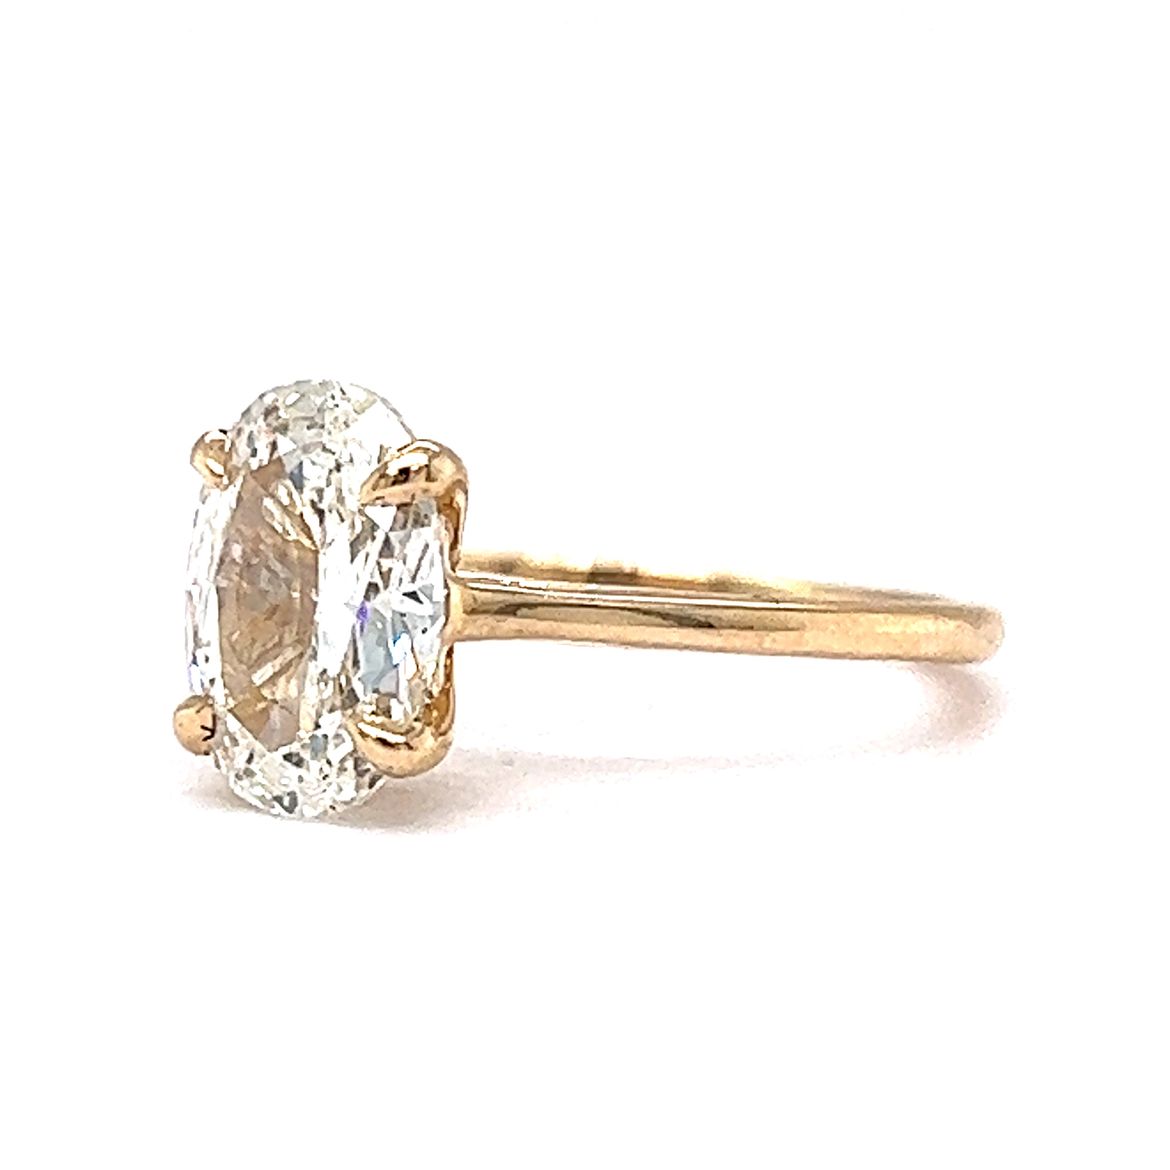 1.62 Oval Diamond Solitaire Engagement Ring in 14k Yellow GoldComposition: 14 Karat Yellow Gold Ring Size: 5.5 Total Diamond Weight: 1.62ct Total Gram Weight: 2.30 g Inscription: 14k
      